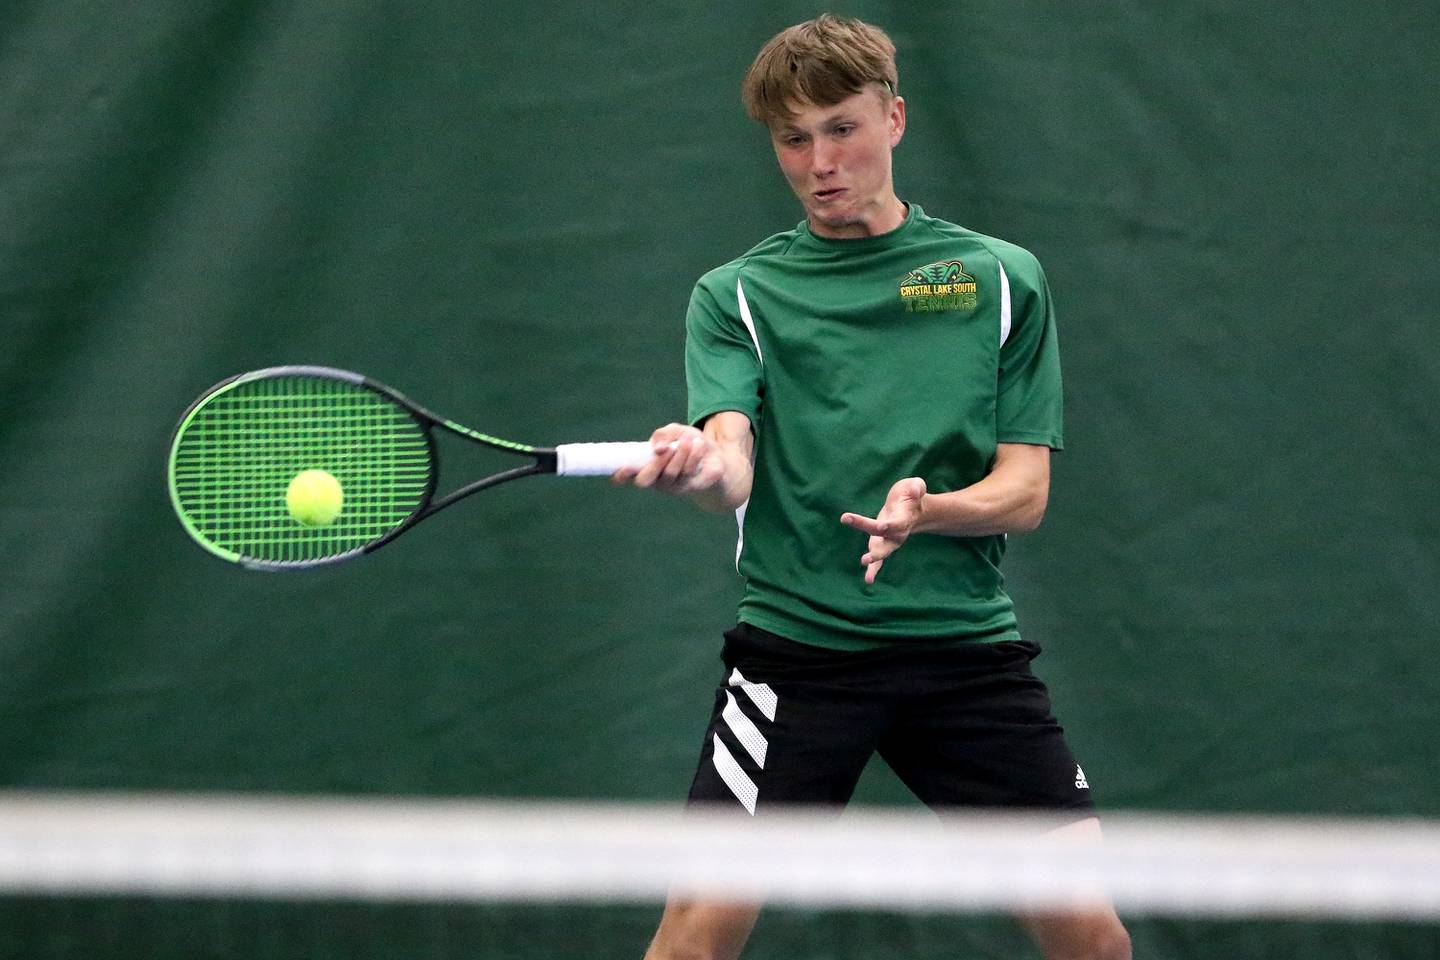 Crystal Lake South's Jackson Schuetzle takes on Jacobs' Thomas Nelson in the Fox Valley Conference boys tennis tournament singles finals at The Racket Club on Friday, May 28, 2021 in Crystal Lake.